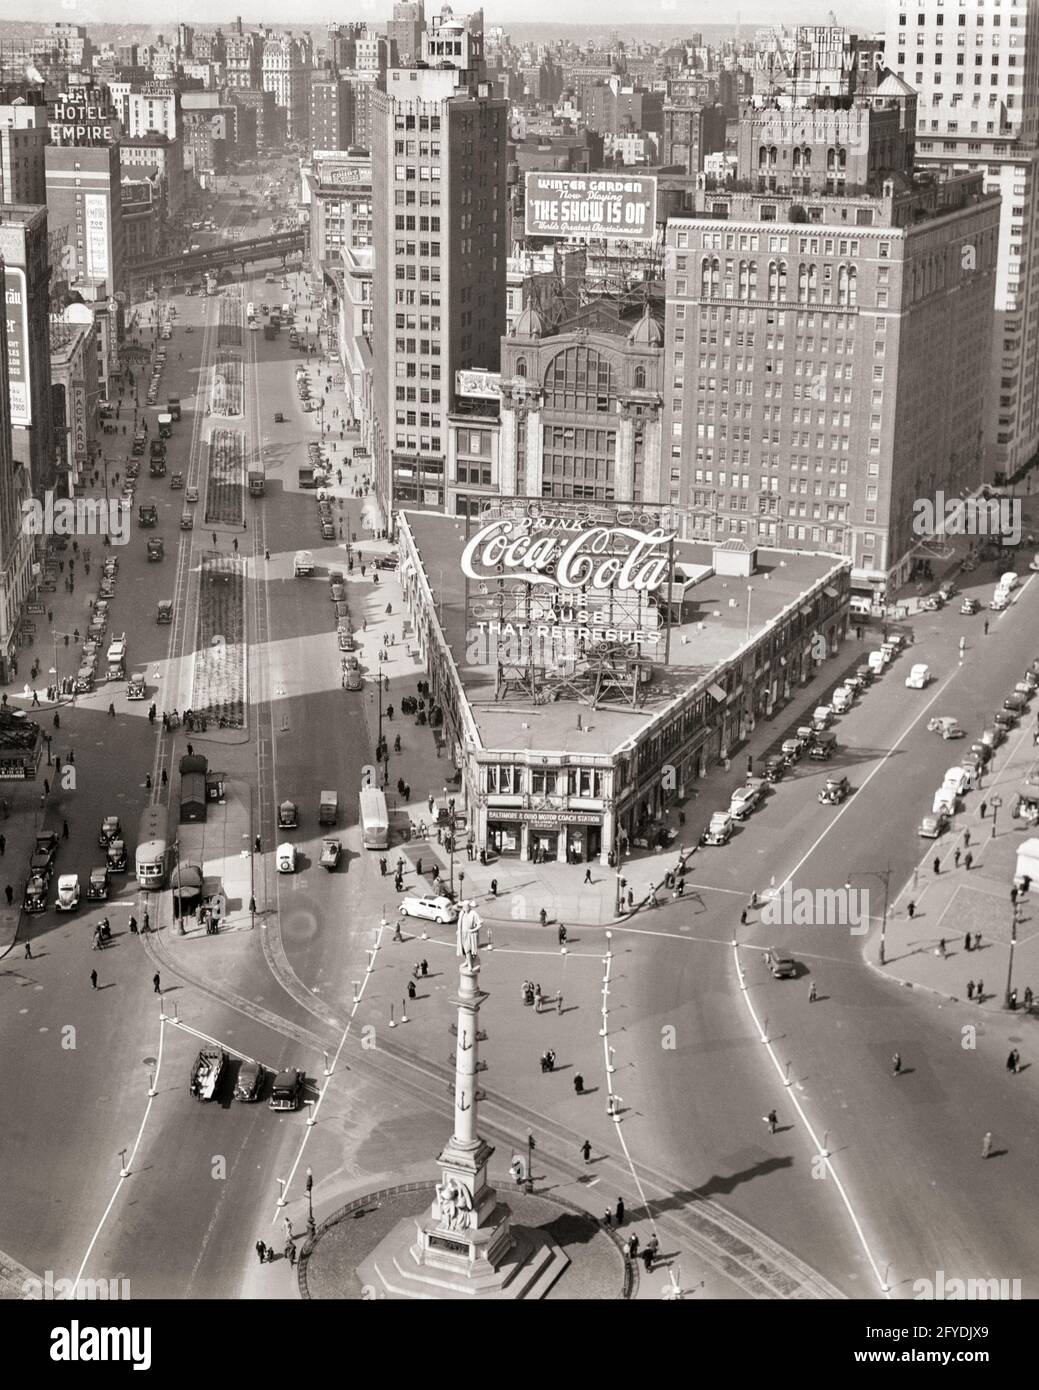 1930s COLUMBUS CIRCLE WITH INTERSECTION OF BROADWAY ON LEFT WITH TROLLEY CARS AND CENTRAL PARK WEST AND 59TH STREETS NYC USA - q49658 CPC001 HARS TRANSPORTATION MEASUREMENT B&W TRACKS NORTH AMERICA NORTH AMERICAN STRUCTURE HIGH ANGLE ADVENTURE INTERSECTION PROPERTY AND AUTOS EXTERIOR PROGRESS DIRECTION OPPORTUNITY NYC TROLLEY REAL ESTATE NEW YORK STRUCTURES AUTOMOBILES BUS STATION CITIES COLUMBUS CIRCLE VEHICLES EDIFICE NEW YORK CITY 59TH BROADWAY BLACK AND WHITE CENTRAL PARK CENTRAL PARK WEST CHRISTOPHER COLUMBUS COLUMBUS OLD FASHIONED UPPER WEST SIDE Stock Photo